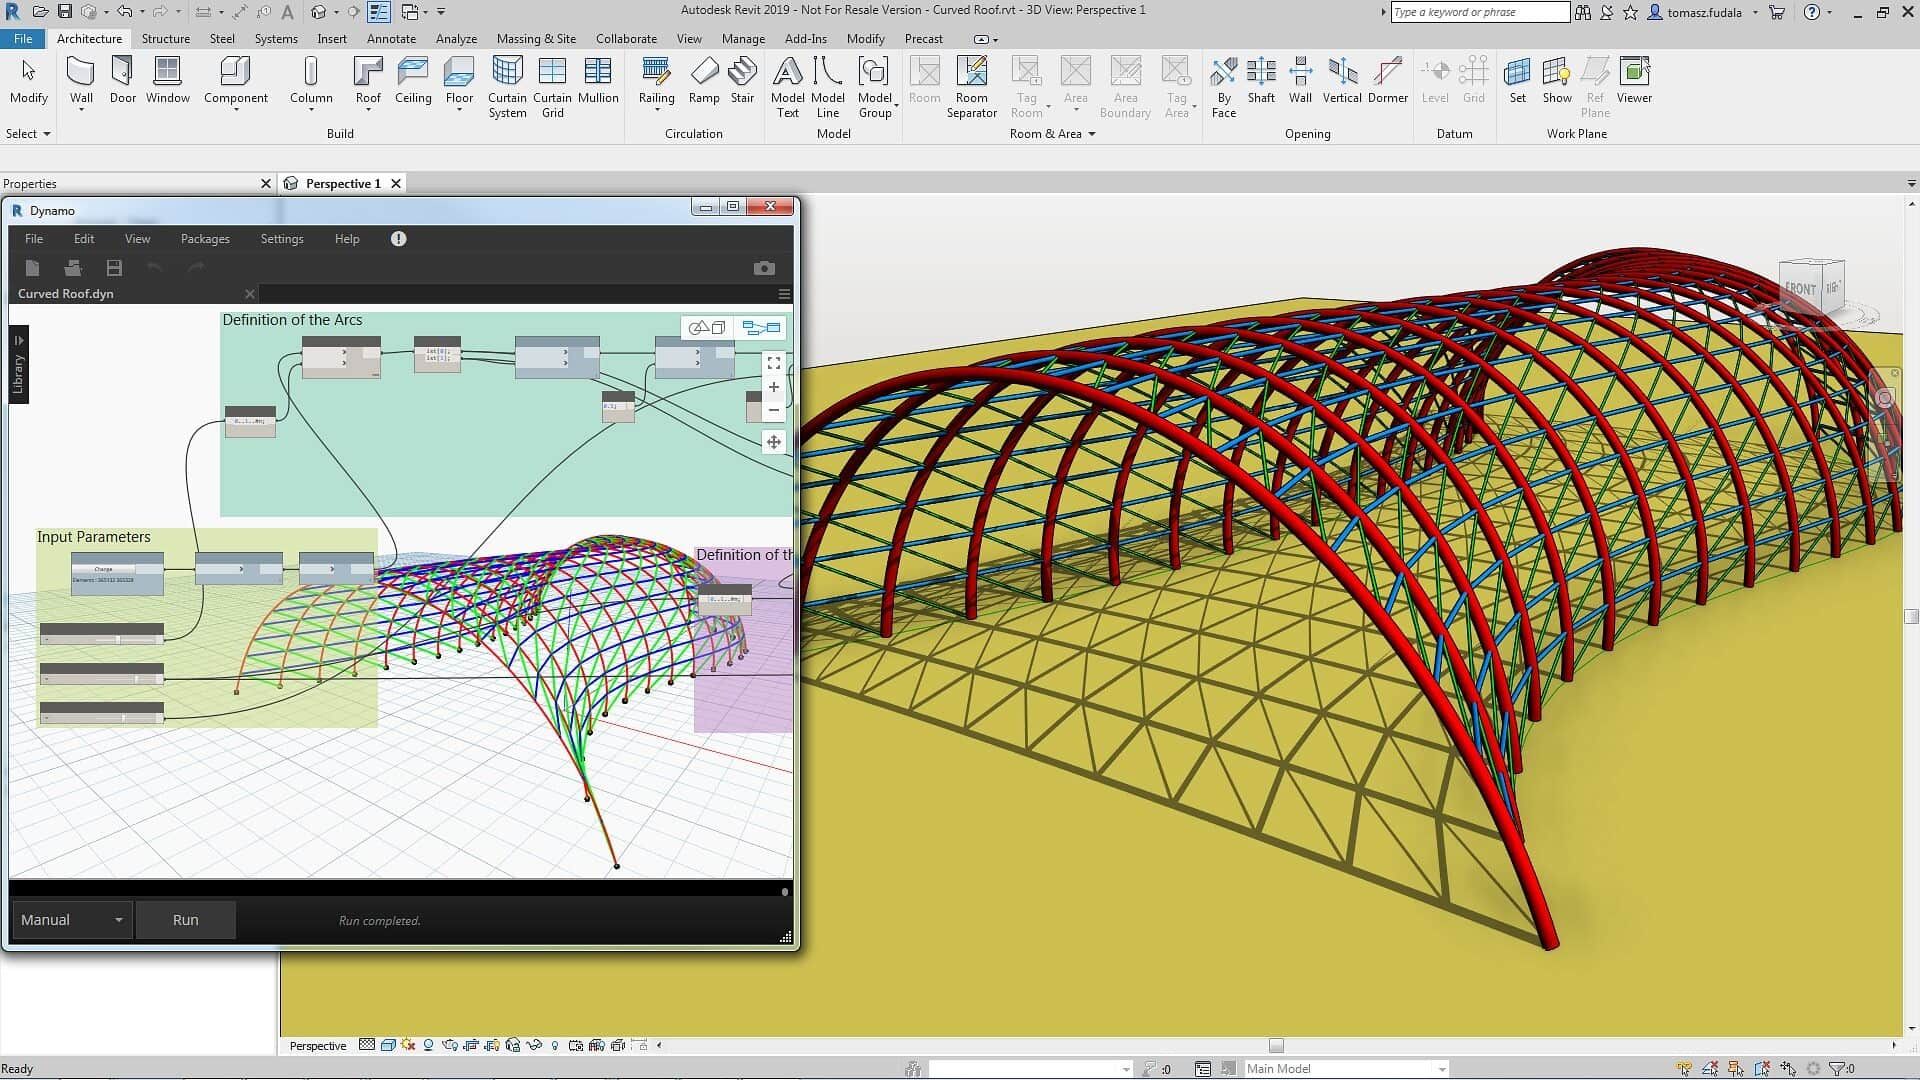 Dynamo interface and workflow for modelling a structural shell in Revit